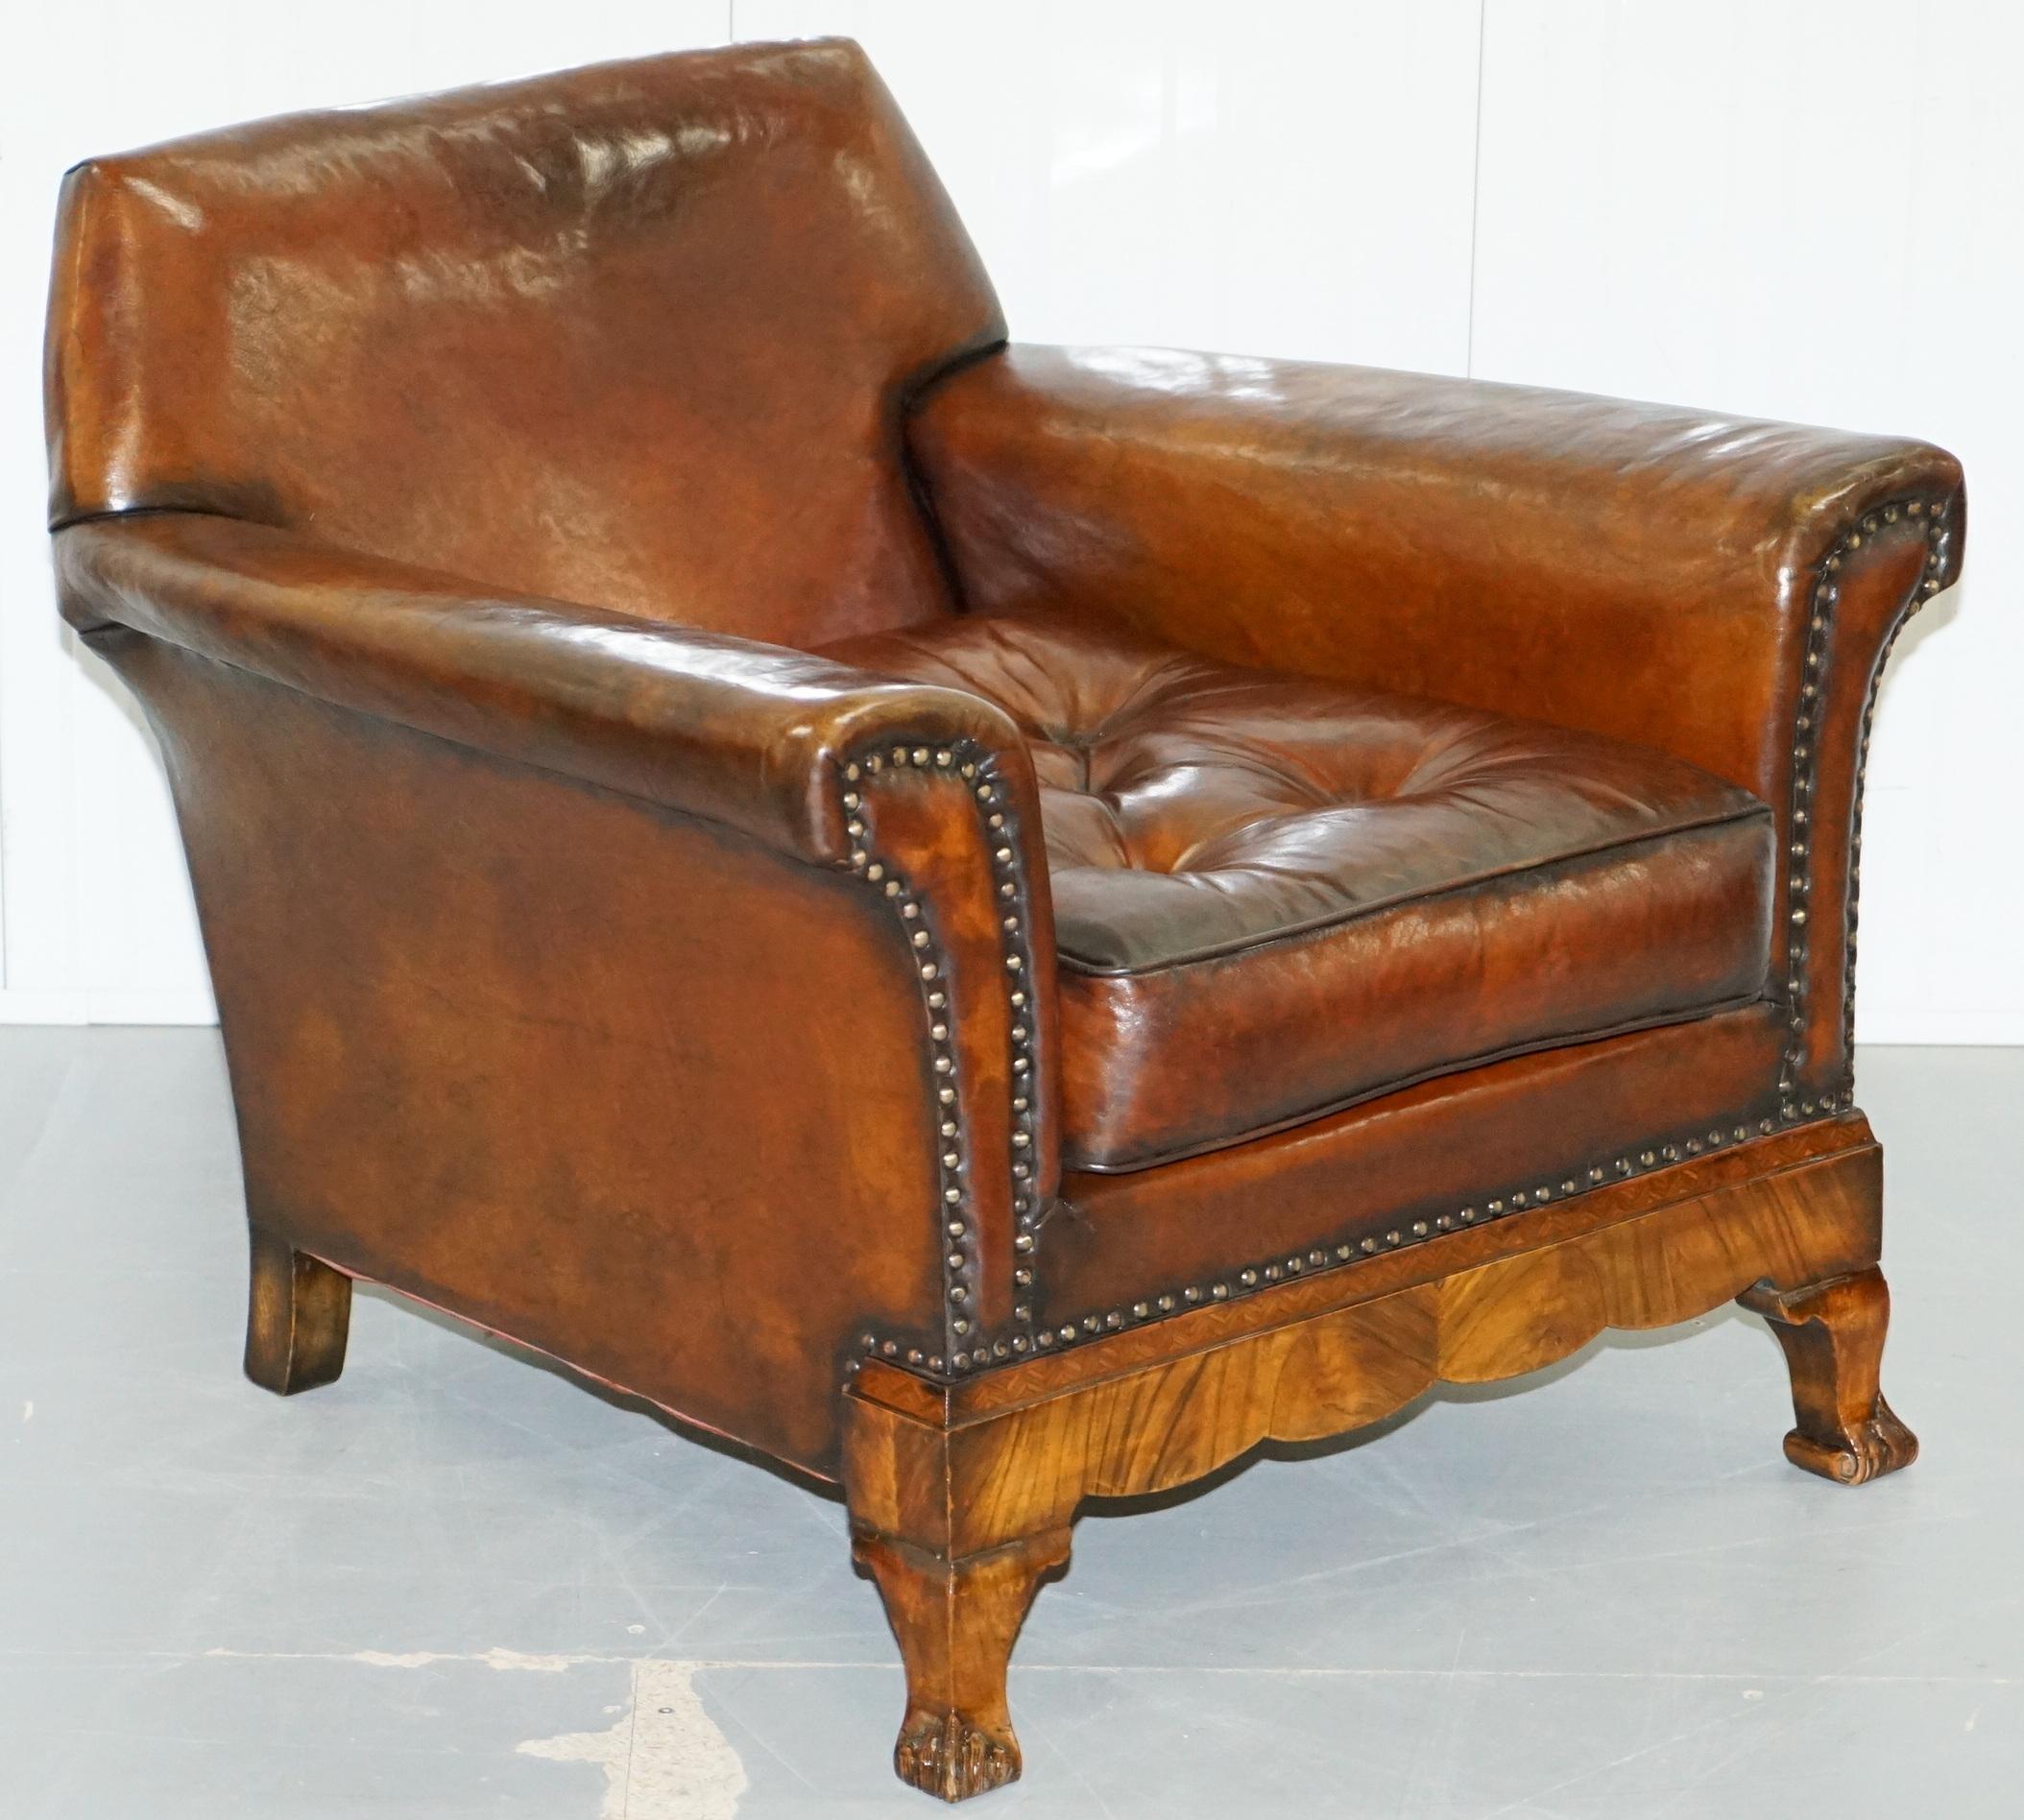 Hand-Carved Thomas Chippendale Marquetry Walnut Inlay Brown Leather Sofa & Armchairs Suite